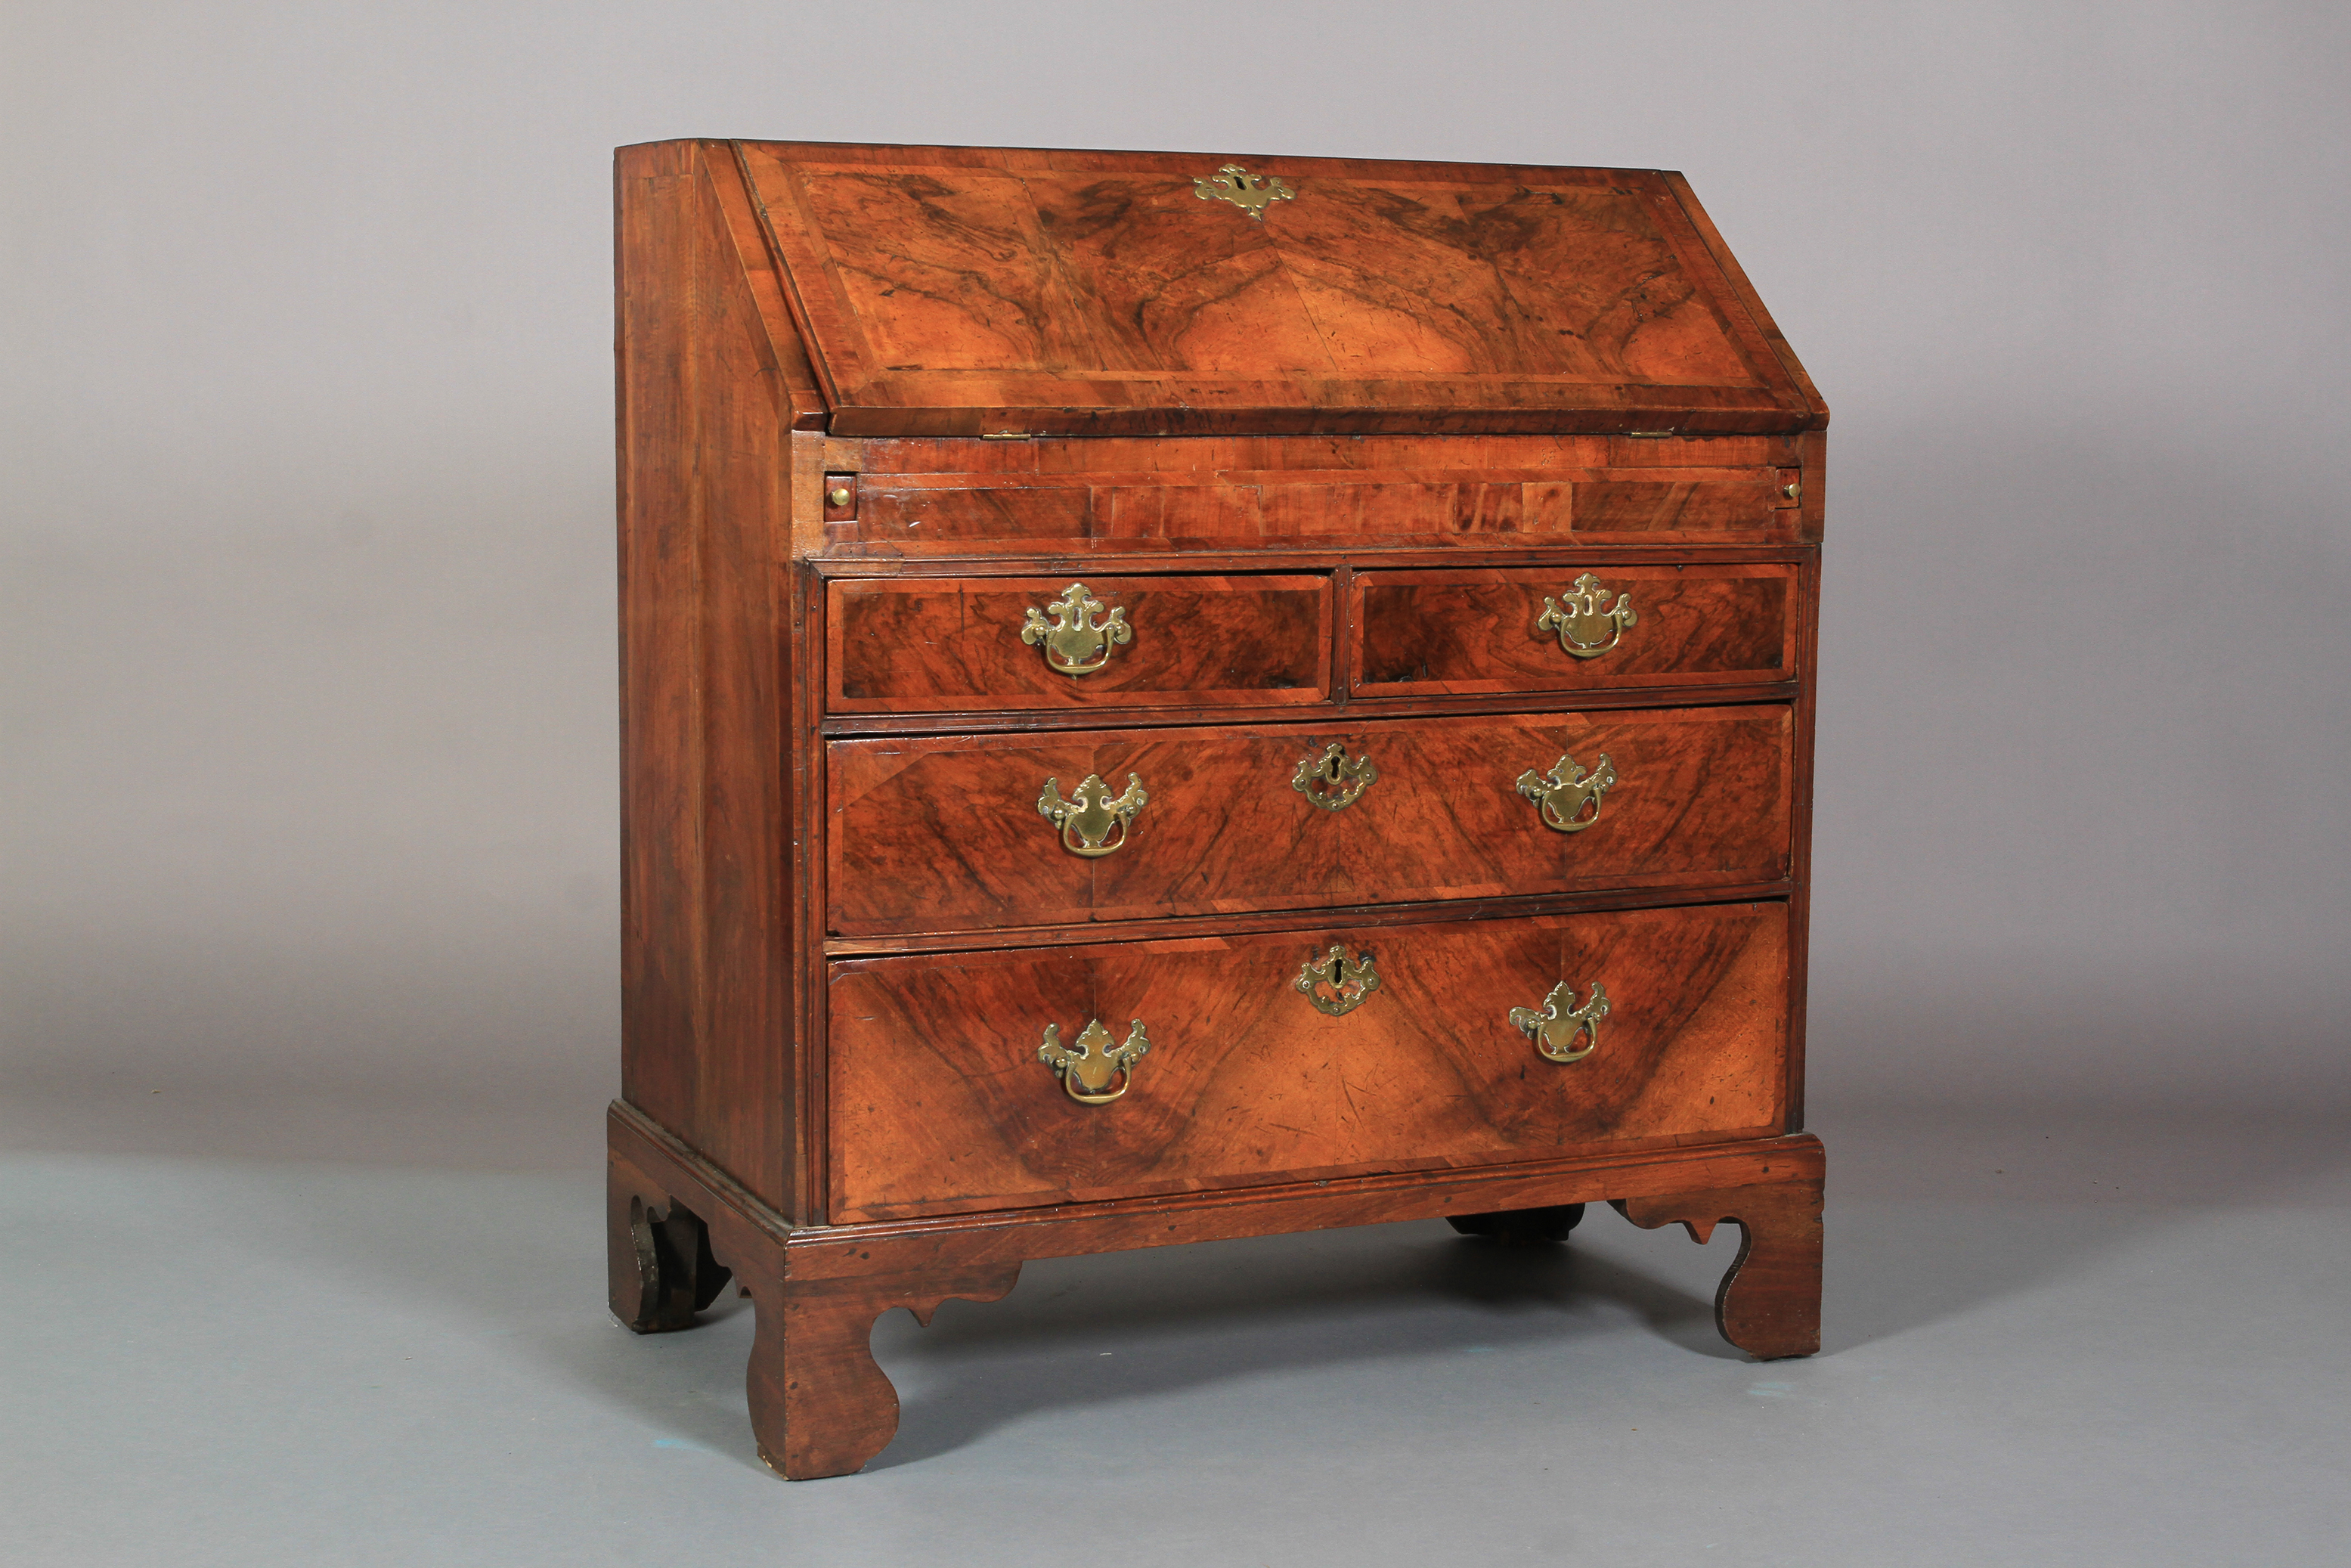 AN EARLY 18TH CENTURY FIGURED WALNUT CROSSBANDED AND BANDED BUREAU having a drop front, the interior - Image 2 of 6